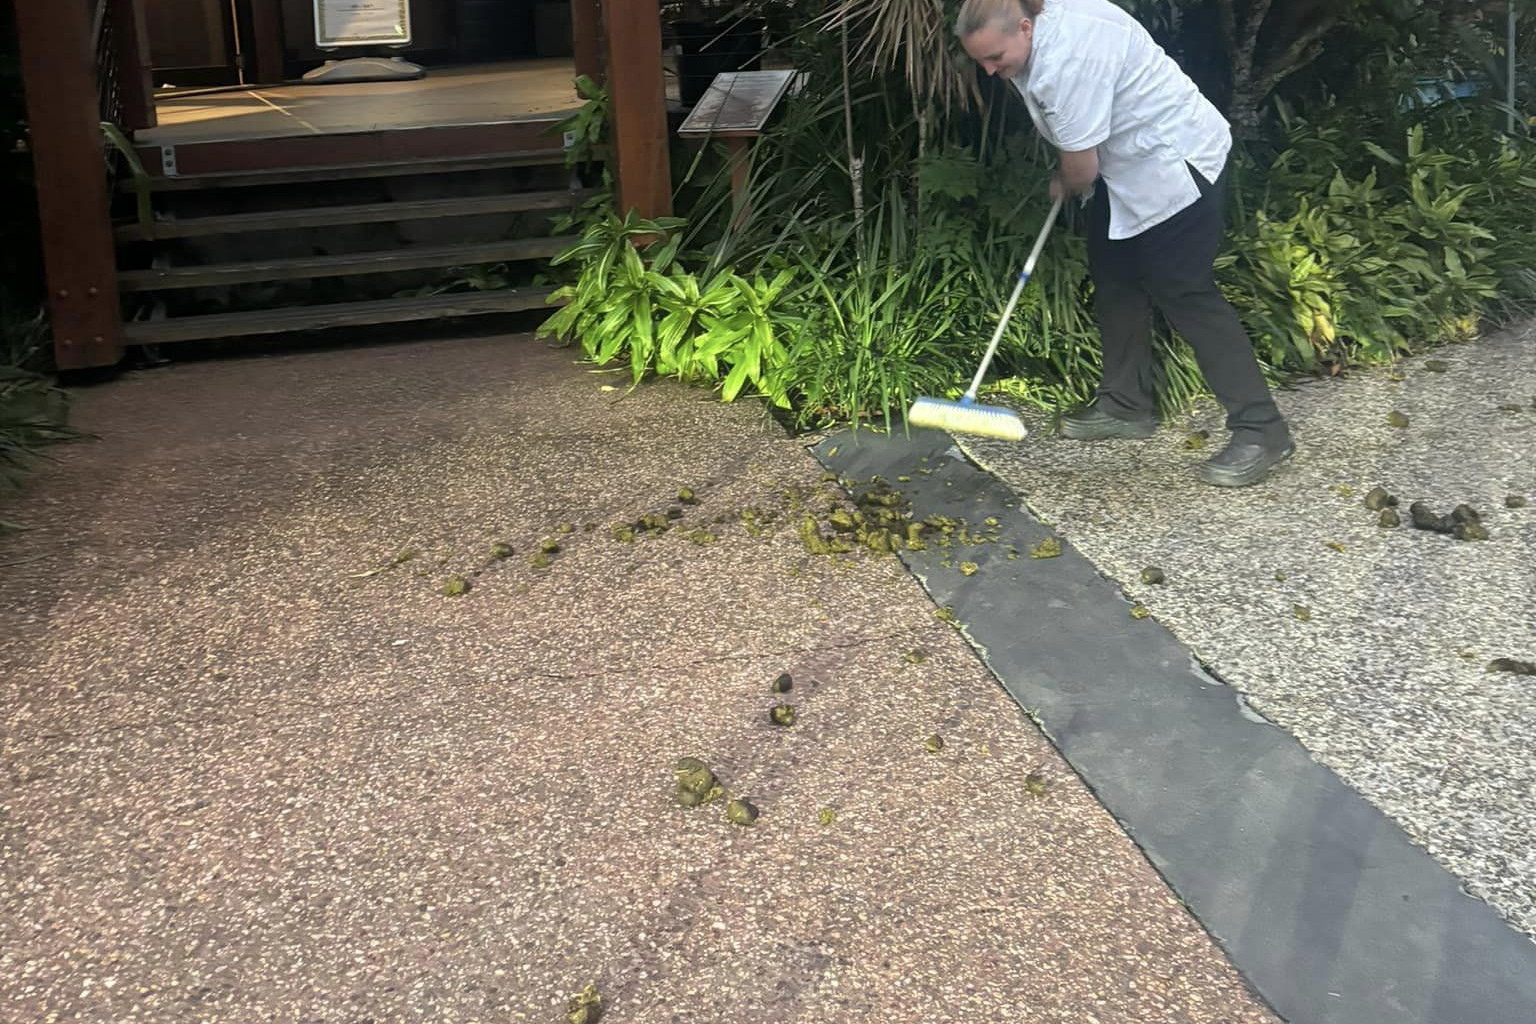 Woodford Hotel staff member does stablehand job, cleaning hotel entrance.